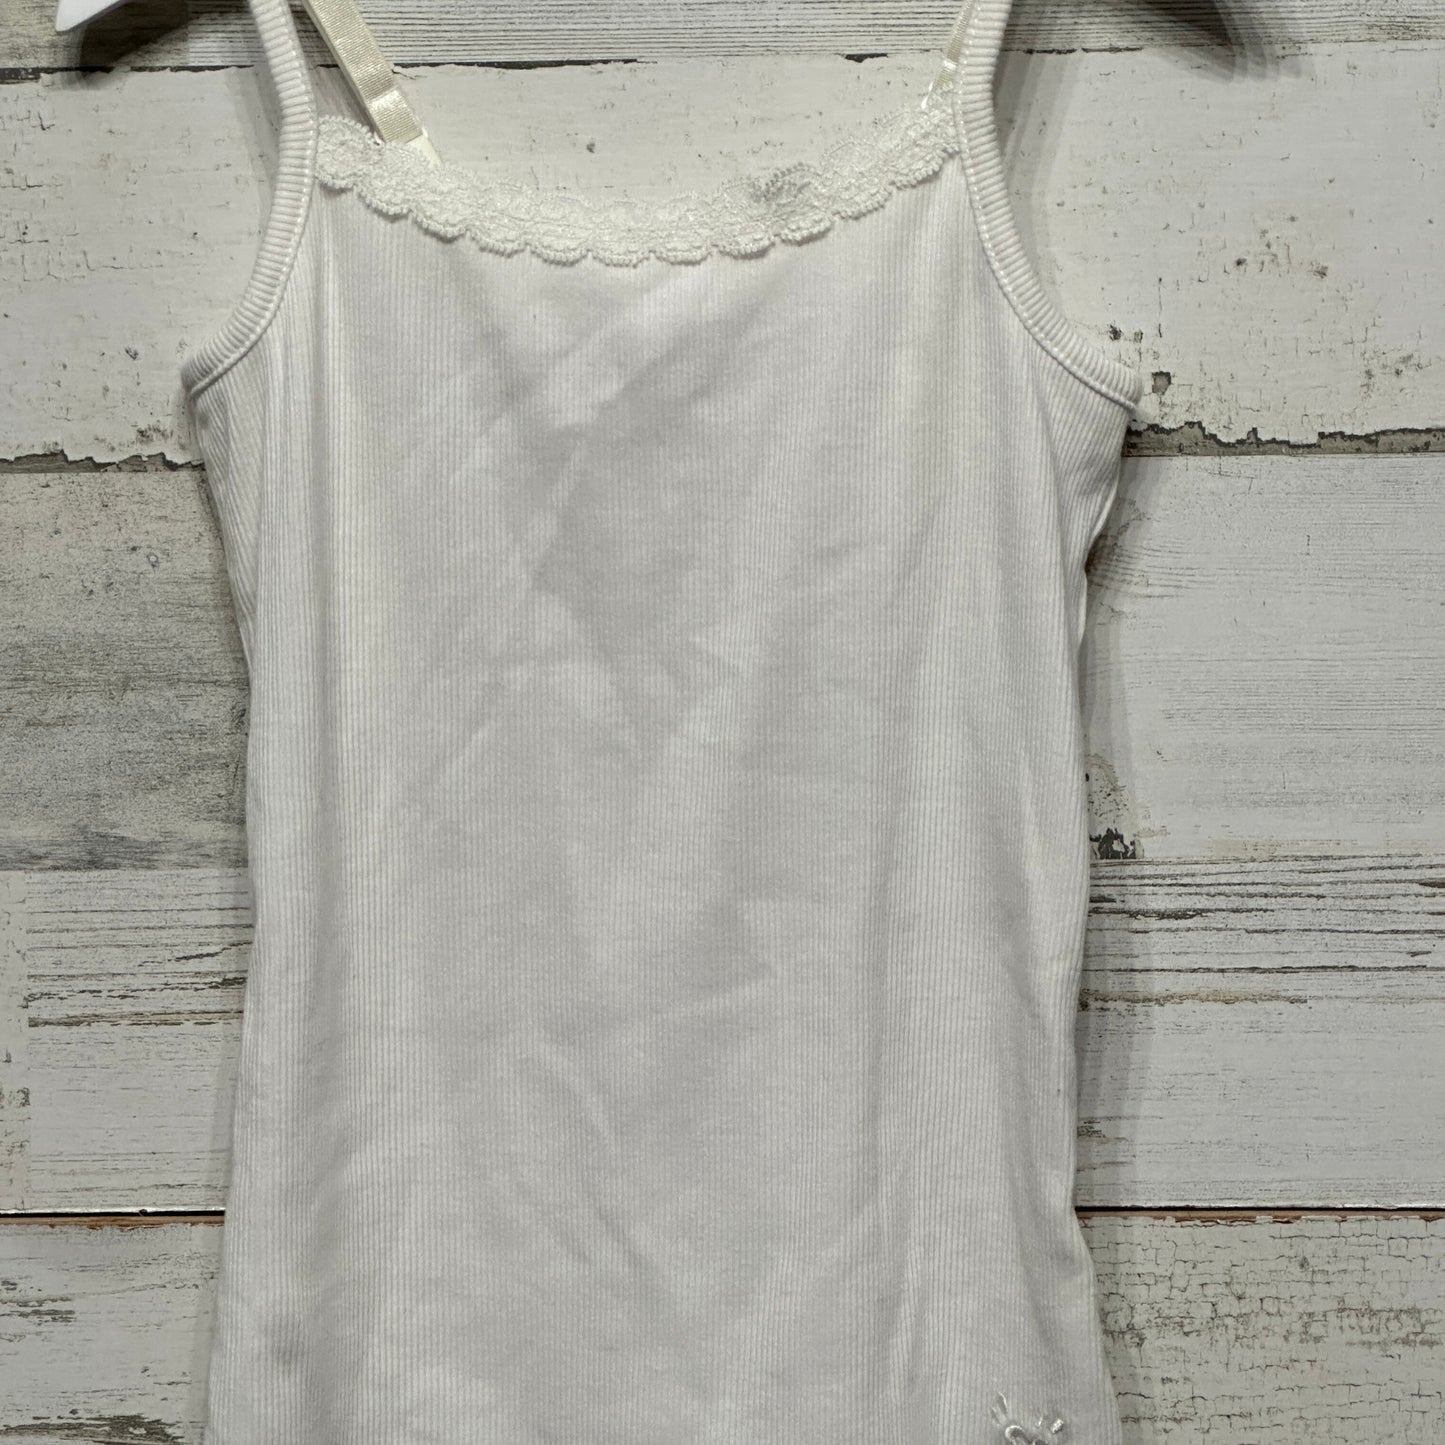 Girls Size 7 Justice White Tank Top - Good Used Condition